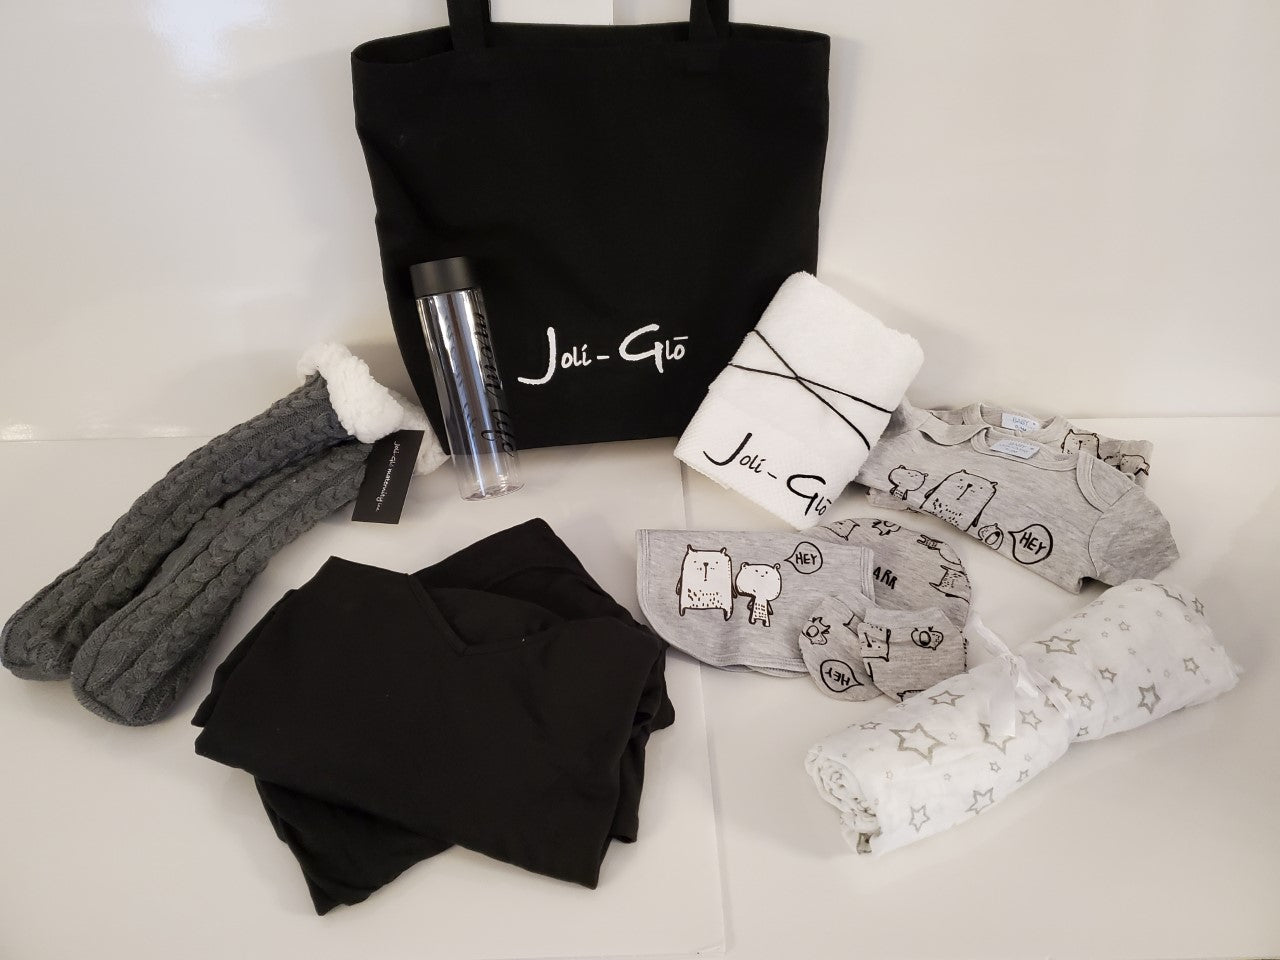 Mom-to-be hospital Bag gift set - includes black canvas tote bag, cotton towel, grey knit slipper socks, grey 5 piece unisex baby pajama set, a white/grey stars bamboo muslin swaddle blanket, "mom life" plastic water bottle and a women's black loungeset